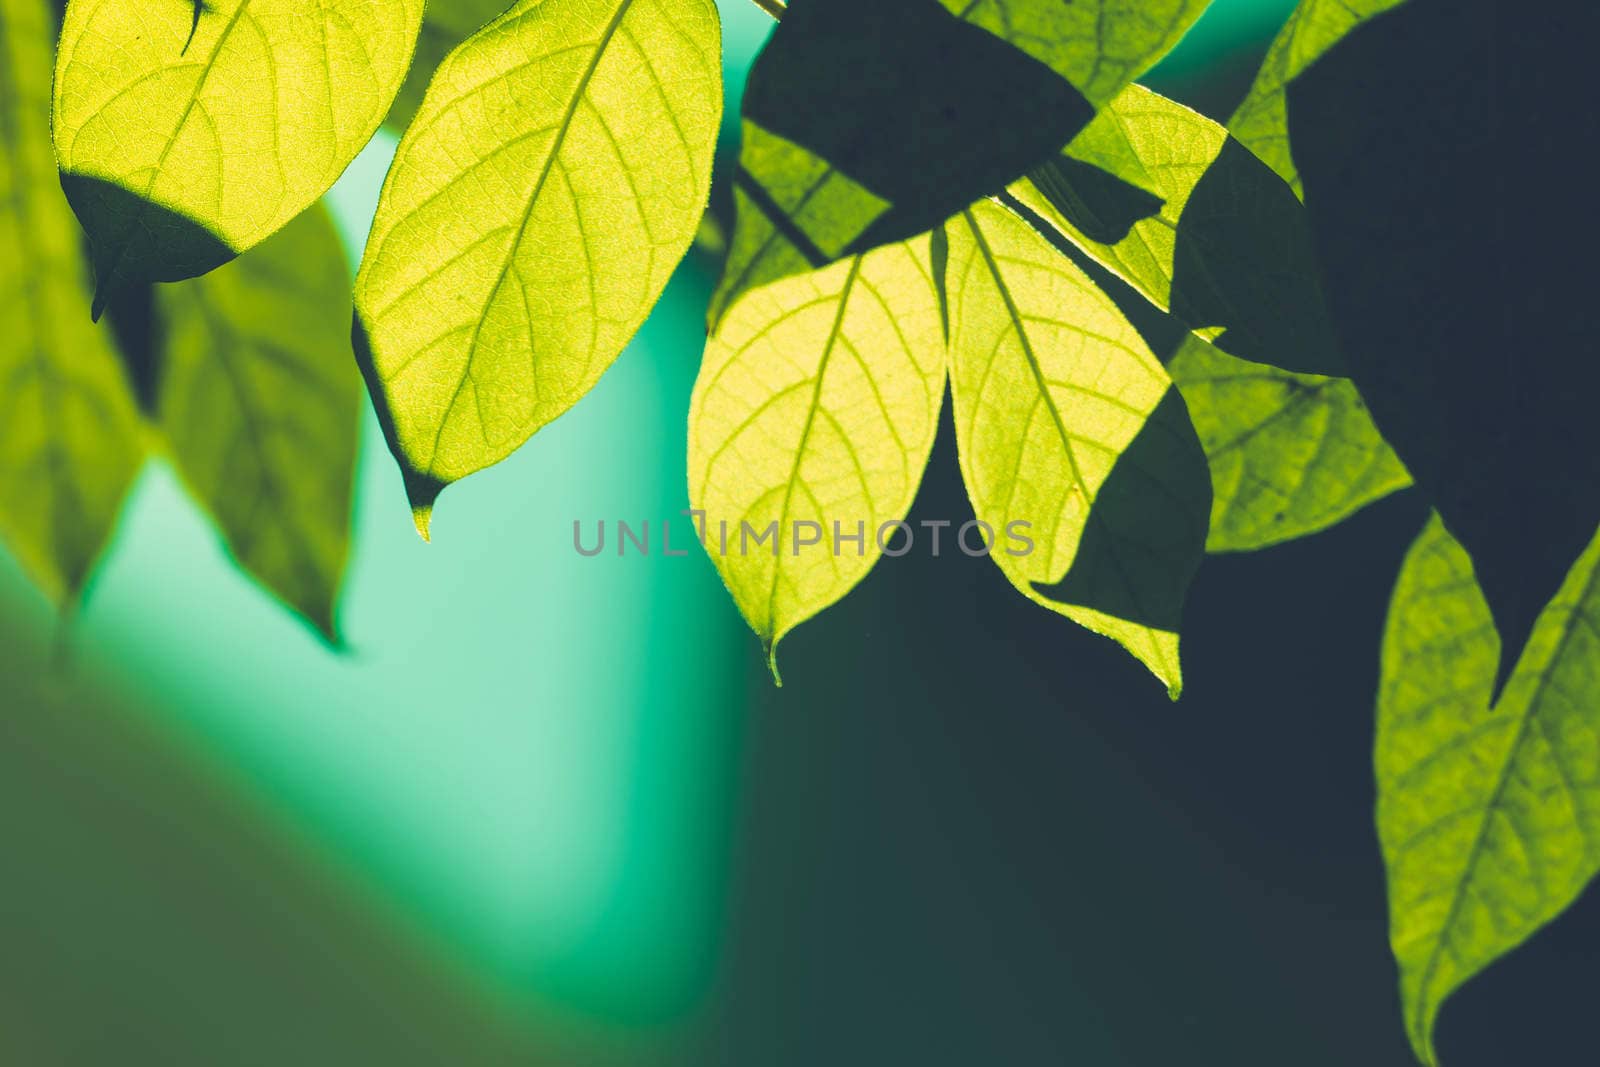 Tree branch over blurred green leaves background by teerawit